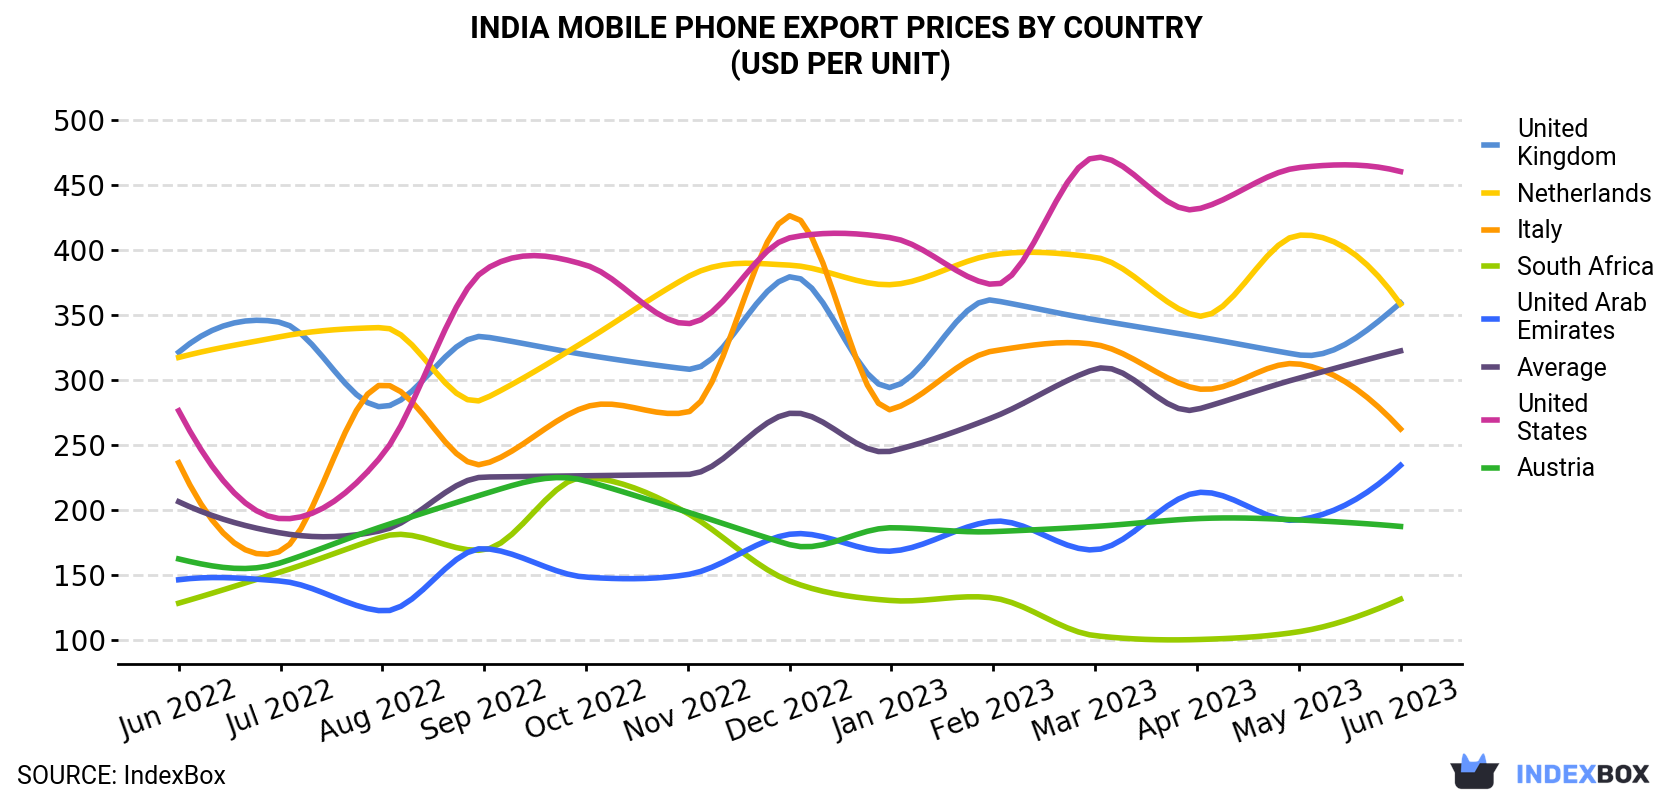 India Mobile Phone Export Prices By Country (USD Per Unit)